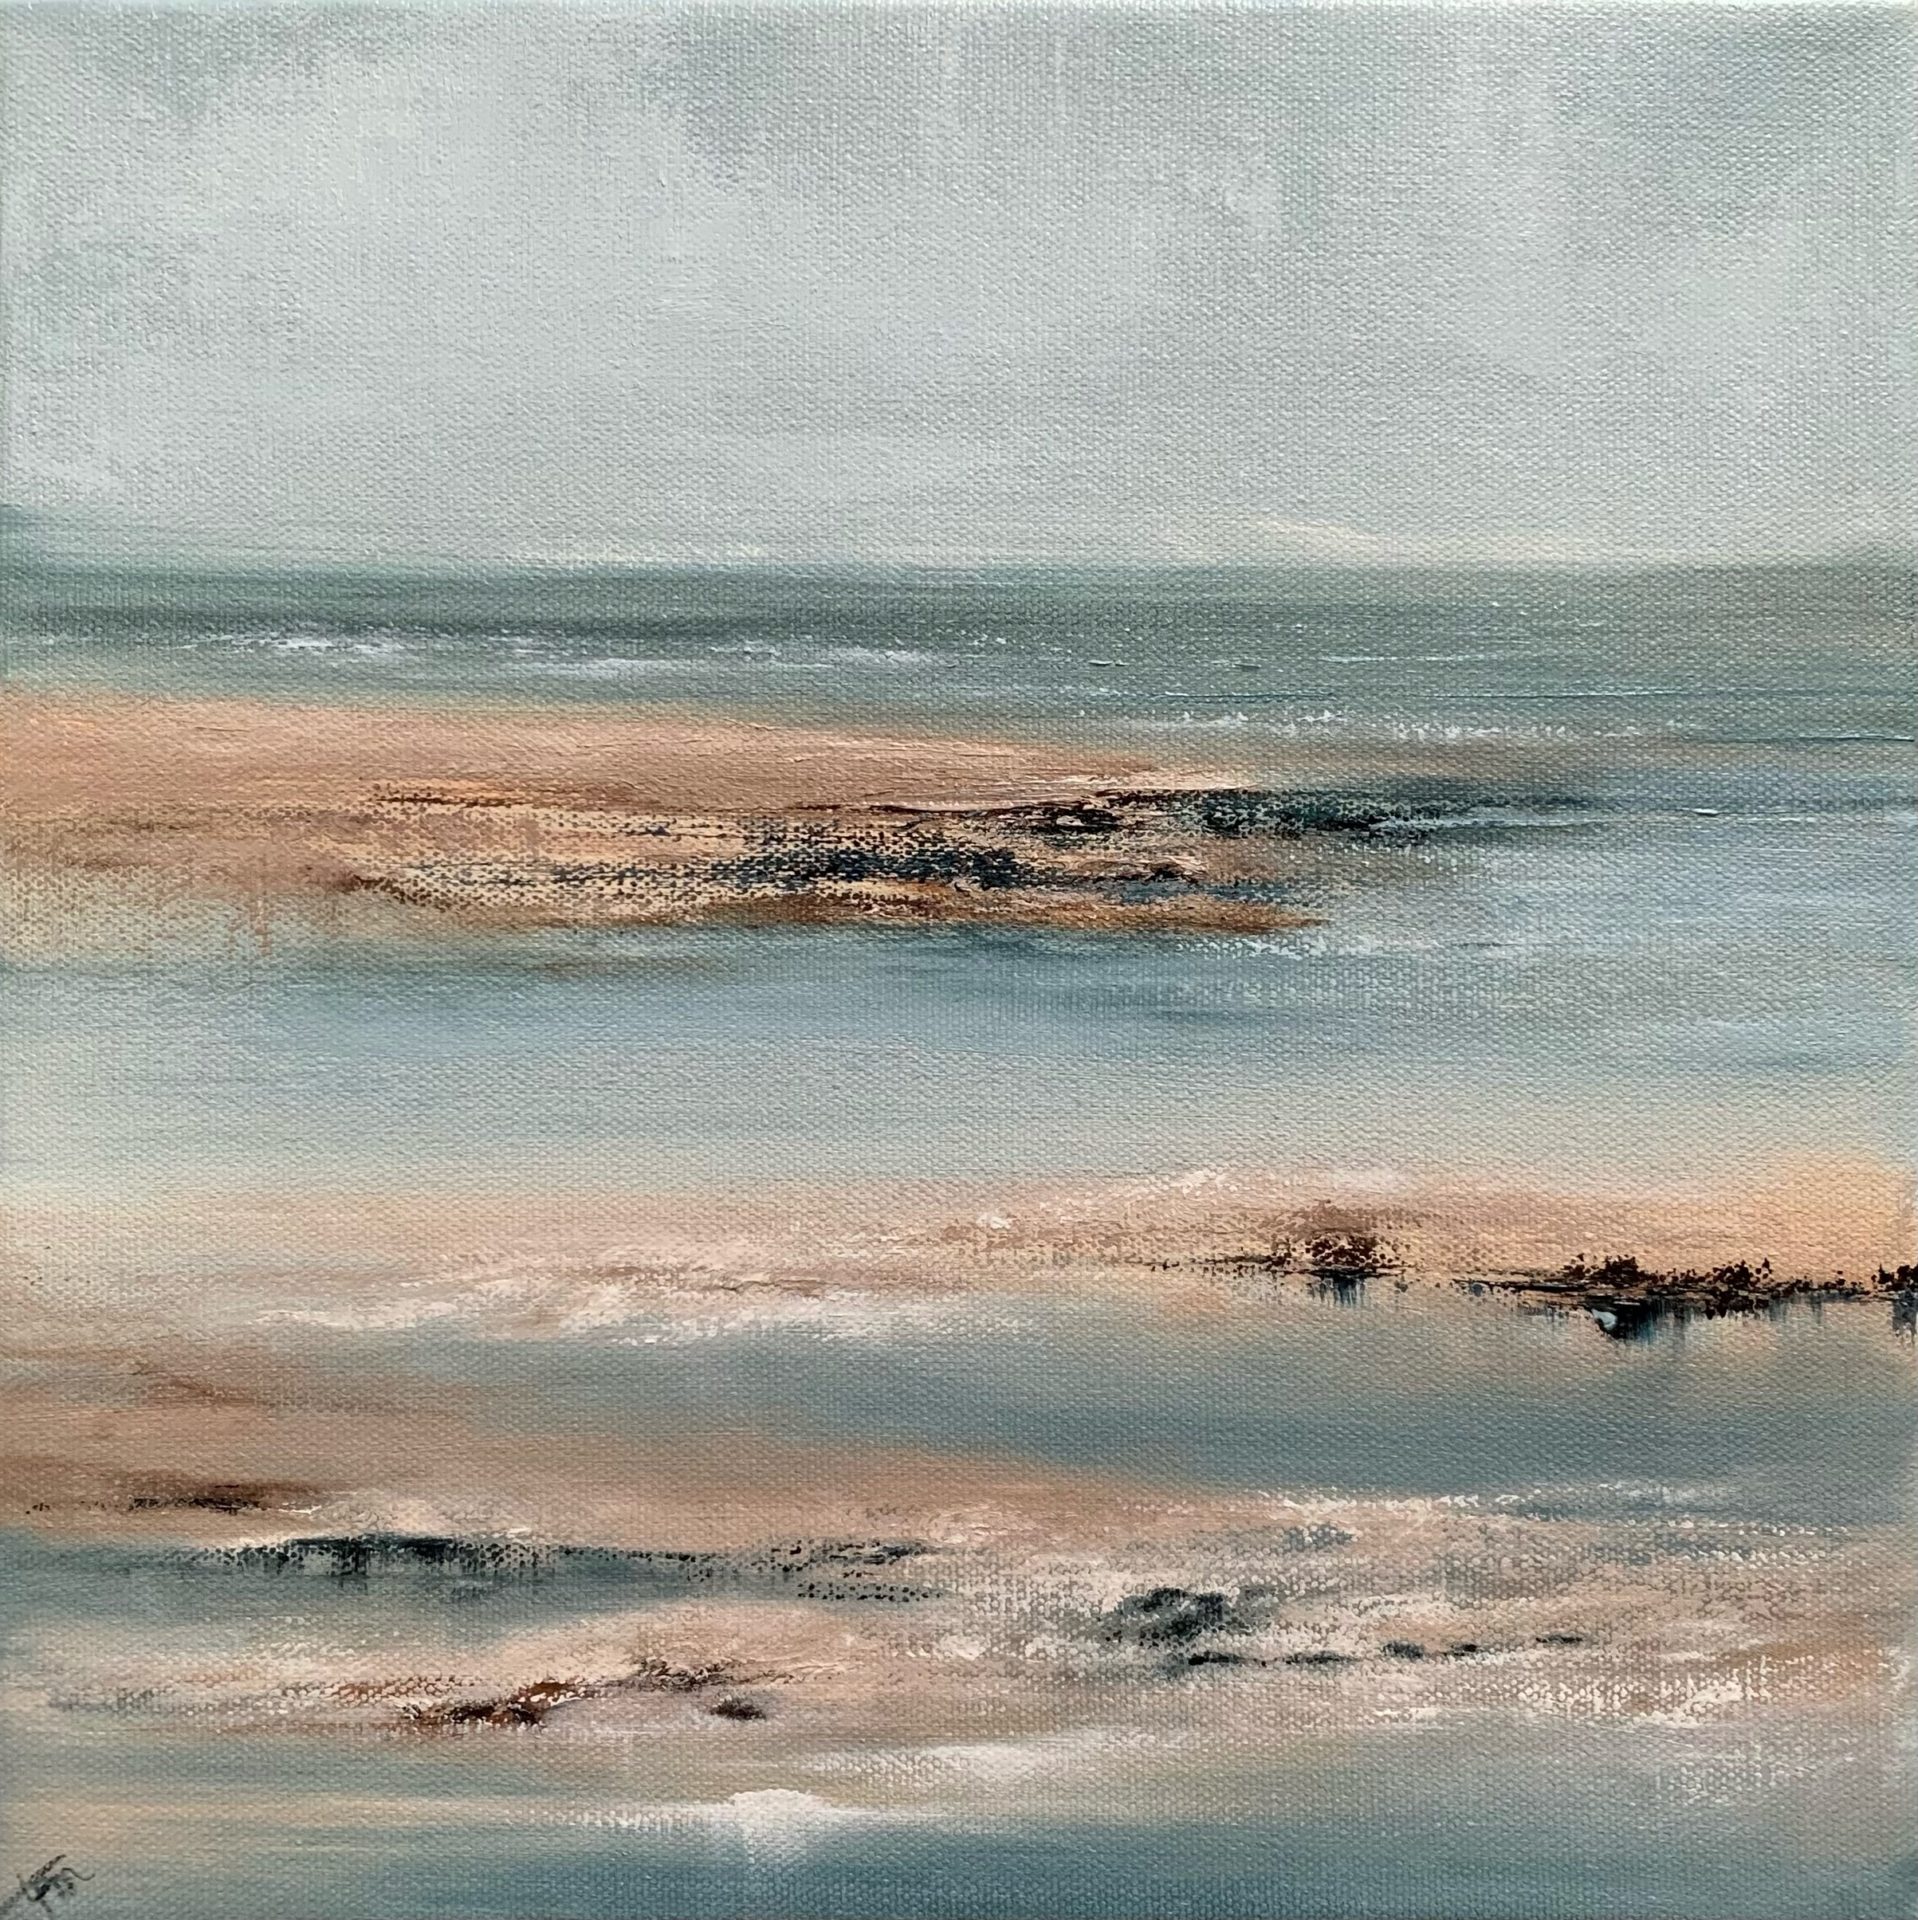 Photo of original seascape oil painting by Tisha Mark, "Tide Pools V" 12"x12 oil on canvas (2022). Seascape painting in cool blues and grays with contrasting warm tones of brown featuring textures found in tide pools during a wintertime visit to a beach.